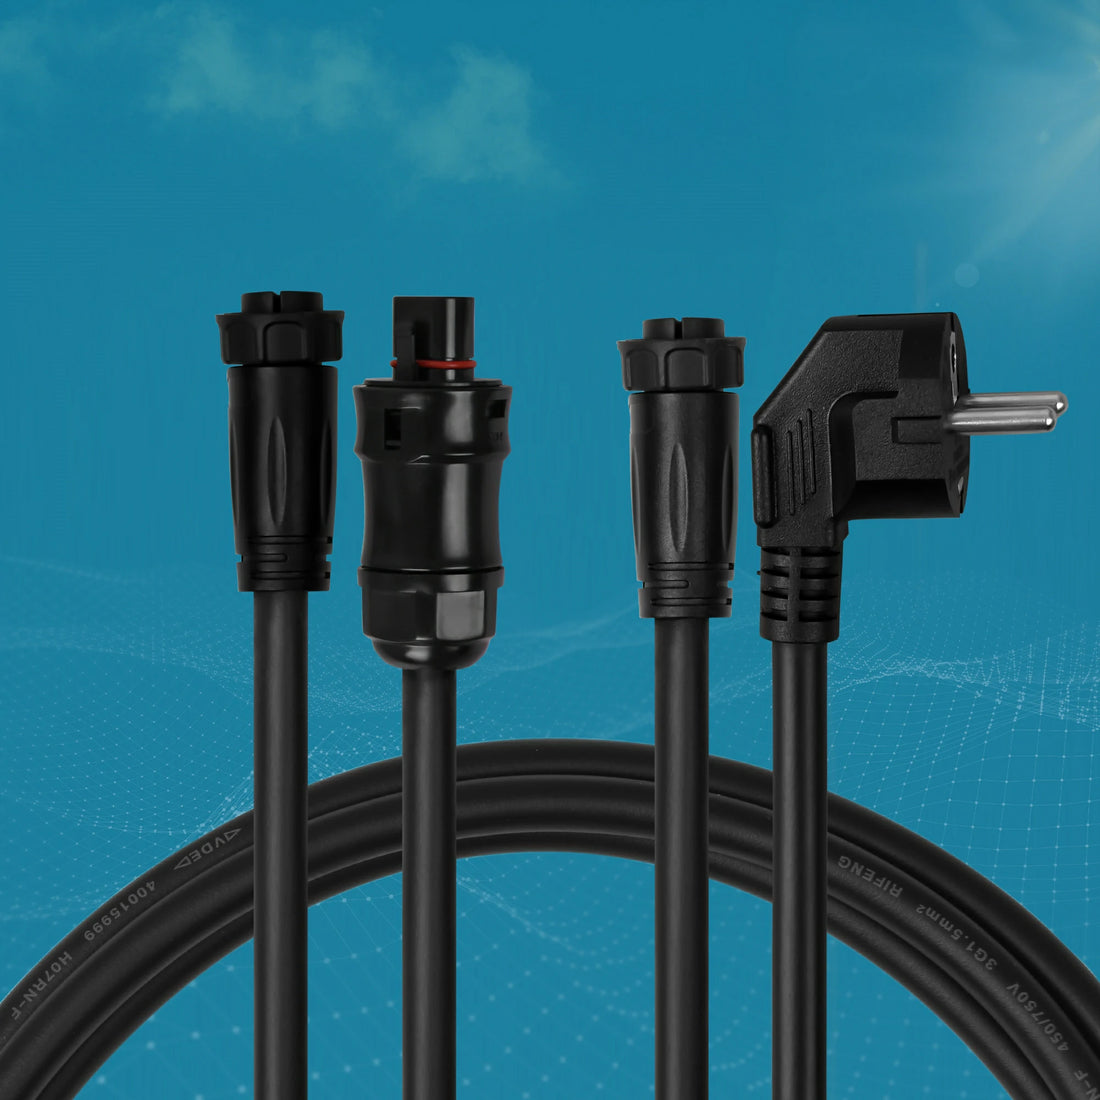 Solar System Extension Cable Kit